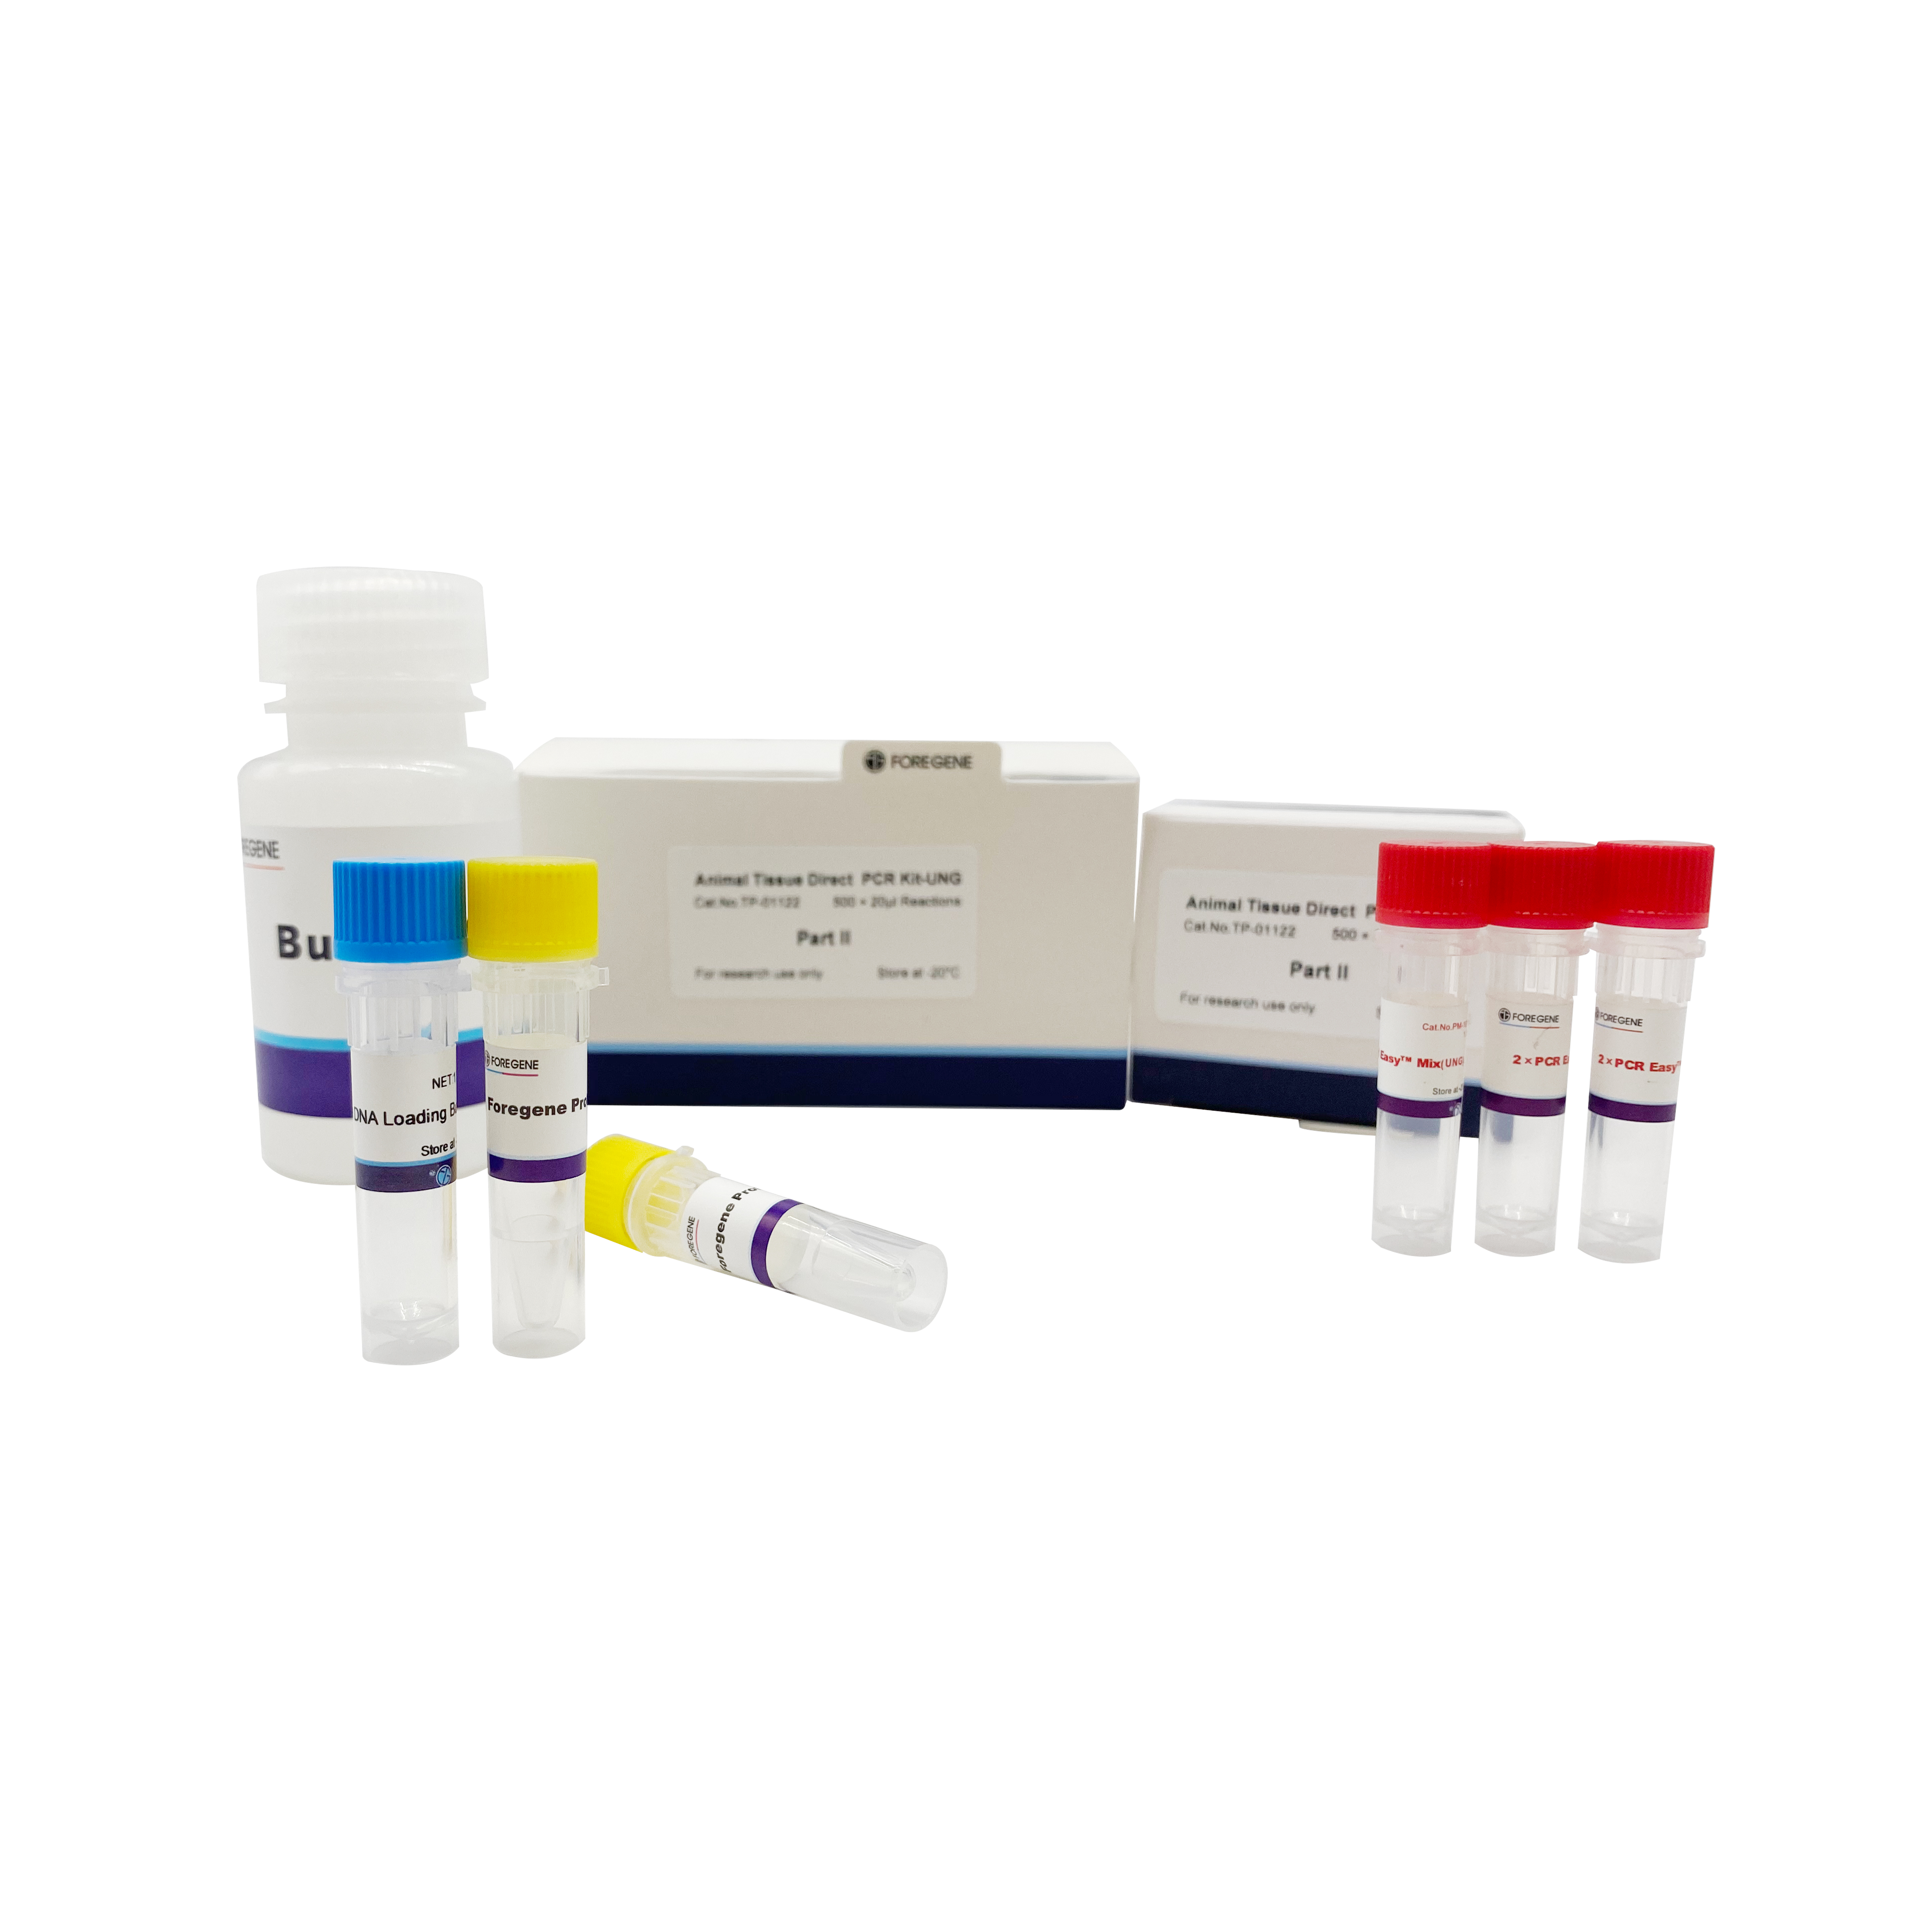 Animal Tissue Direct PCR kit-UNG (sans extraction d'ADN)